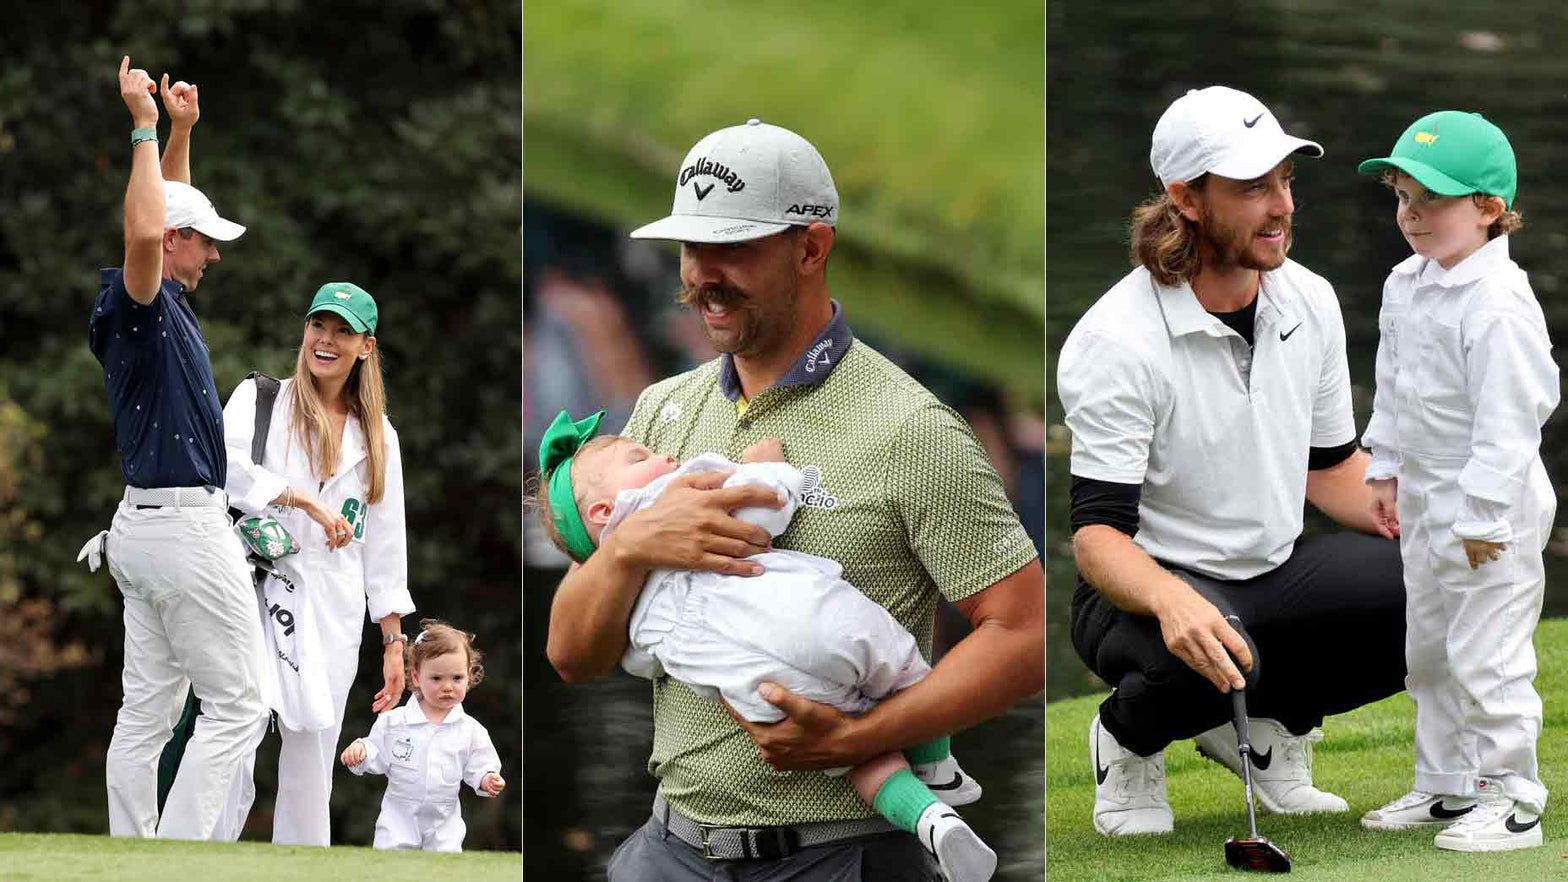 Masters Par3 Contest 21 adorable photos from Wednesday